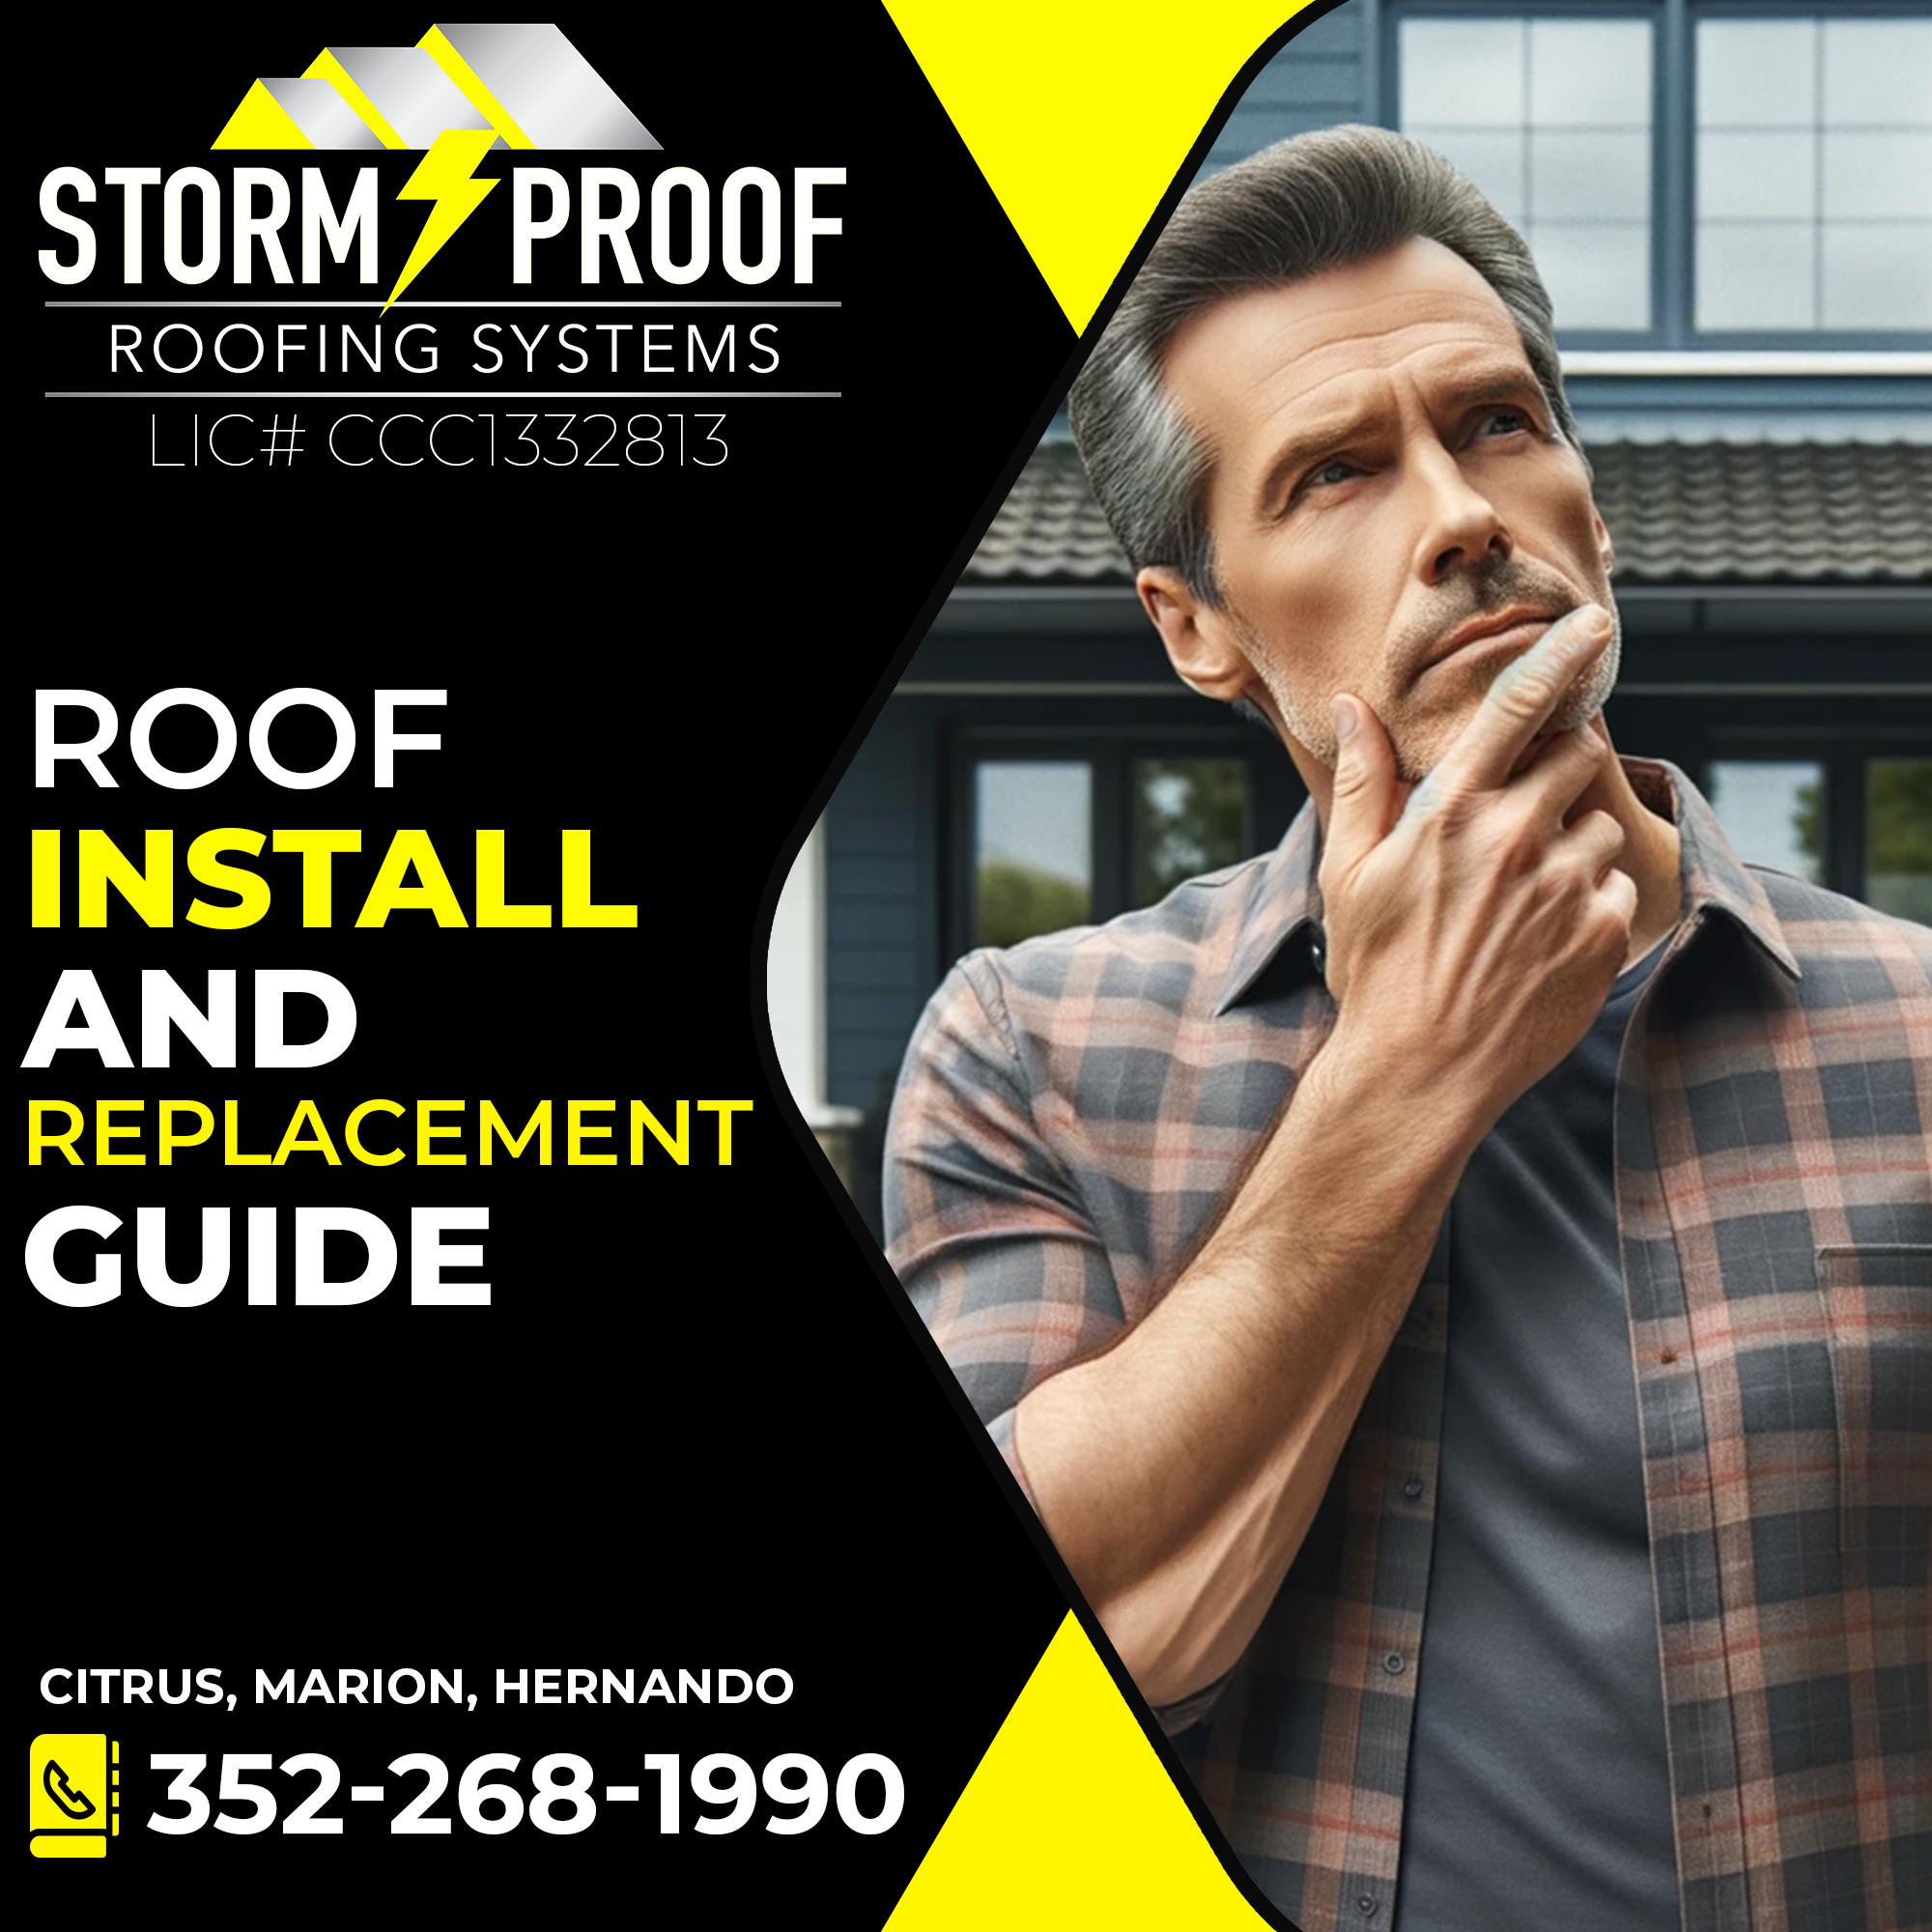 You are currently viewing Roof Installation And Replacement Guide